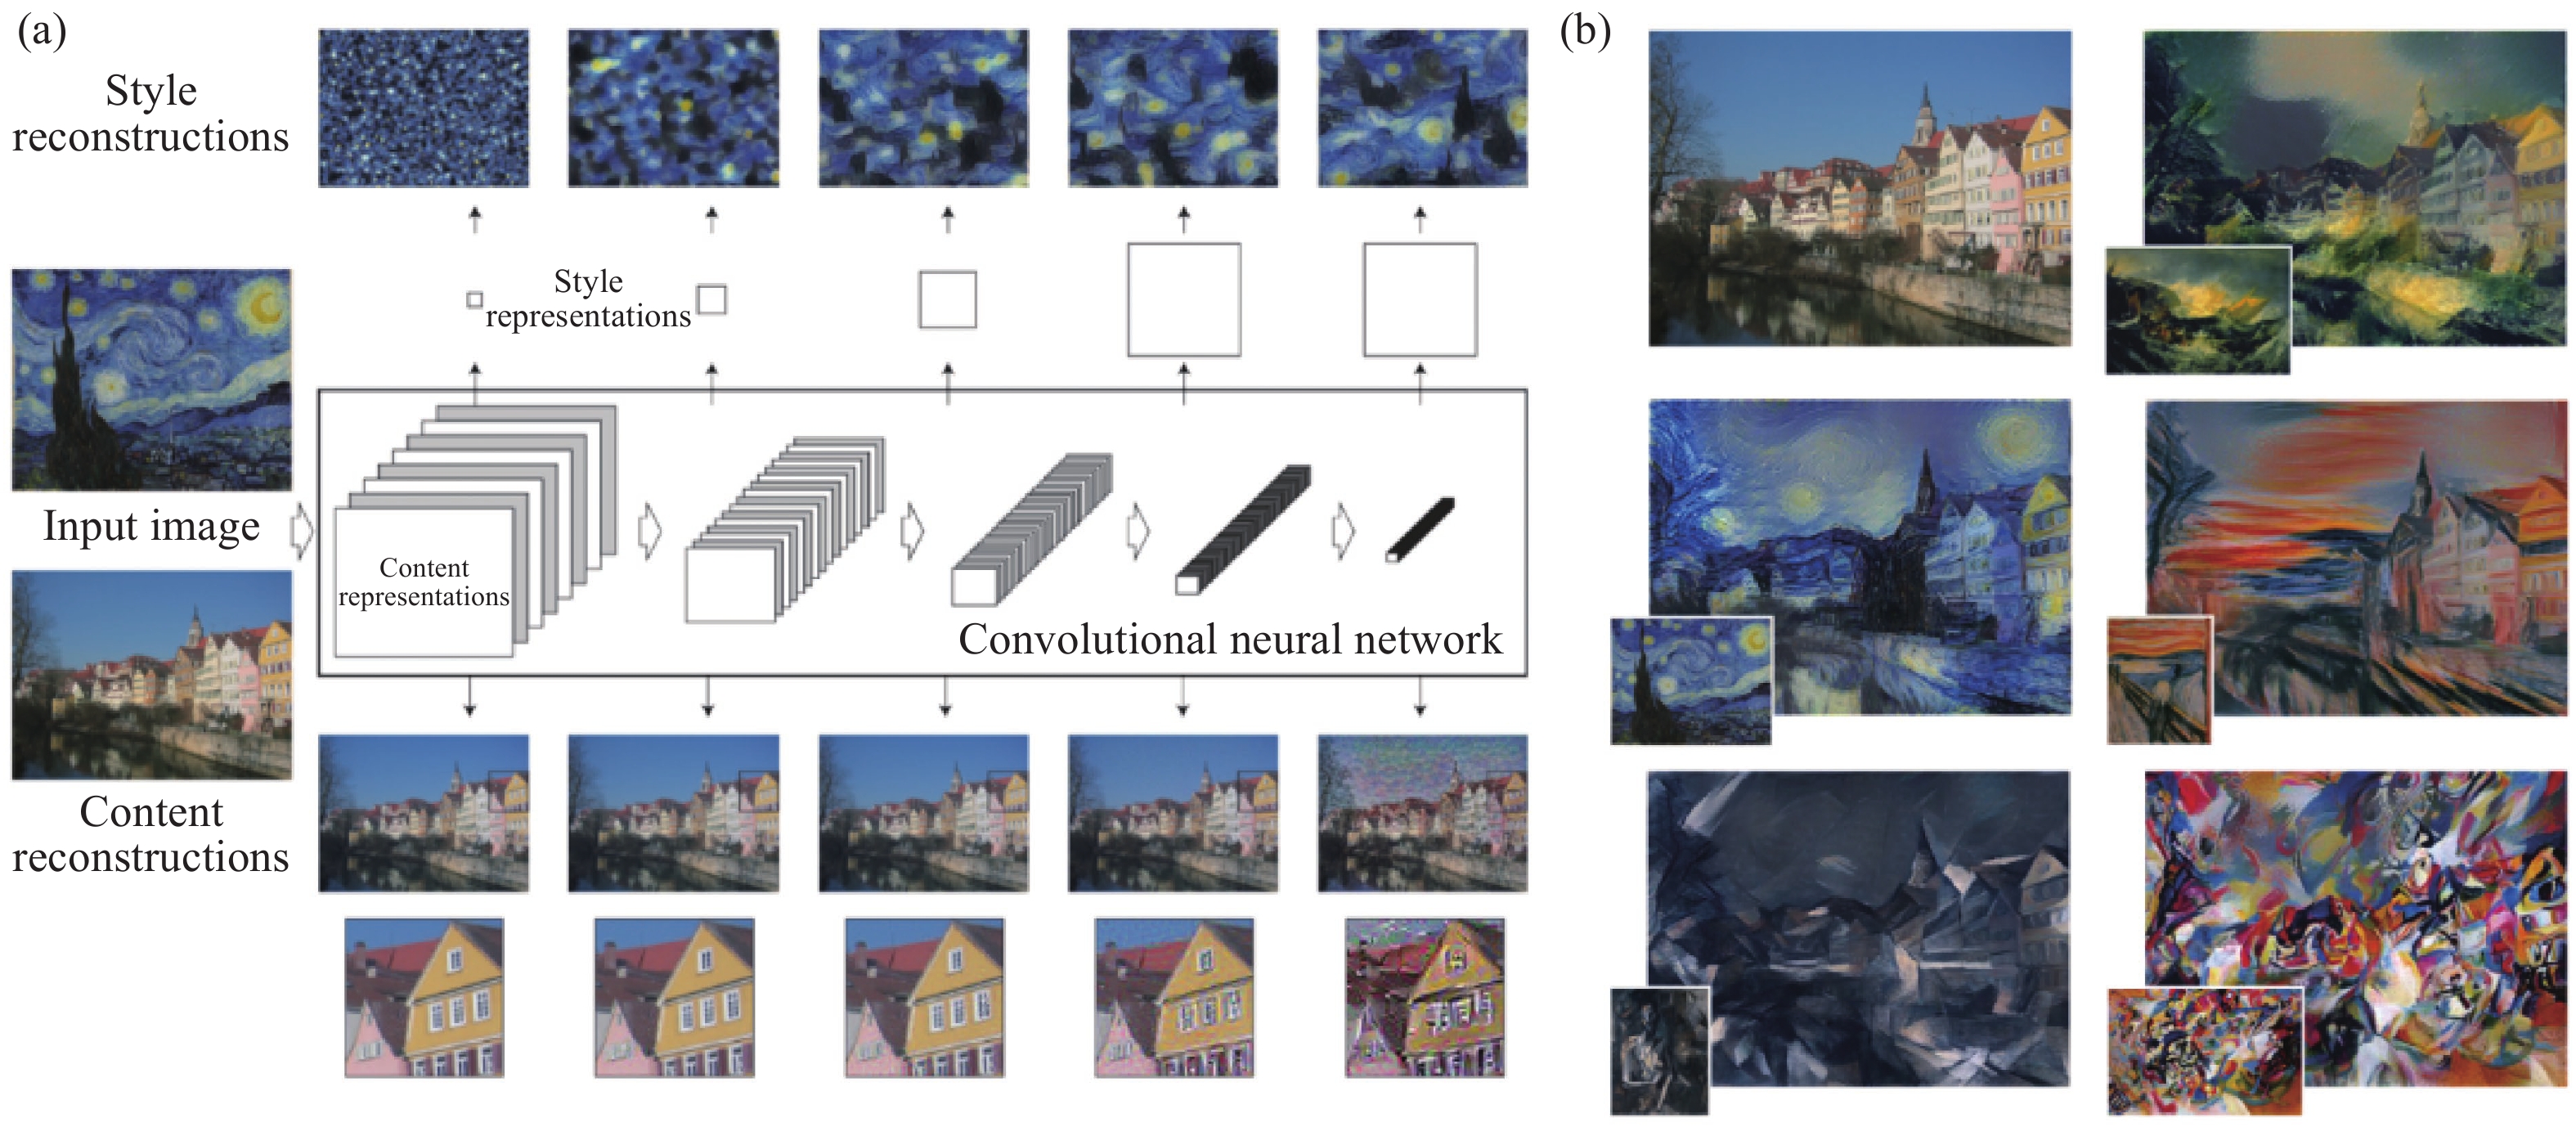 Style transfer algorithm of Gatys et al[38]. (a) Style and content reconstruction; (b) Style transfer example